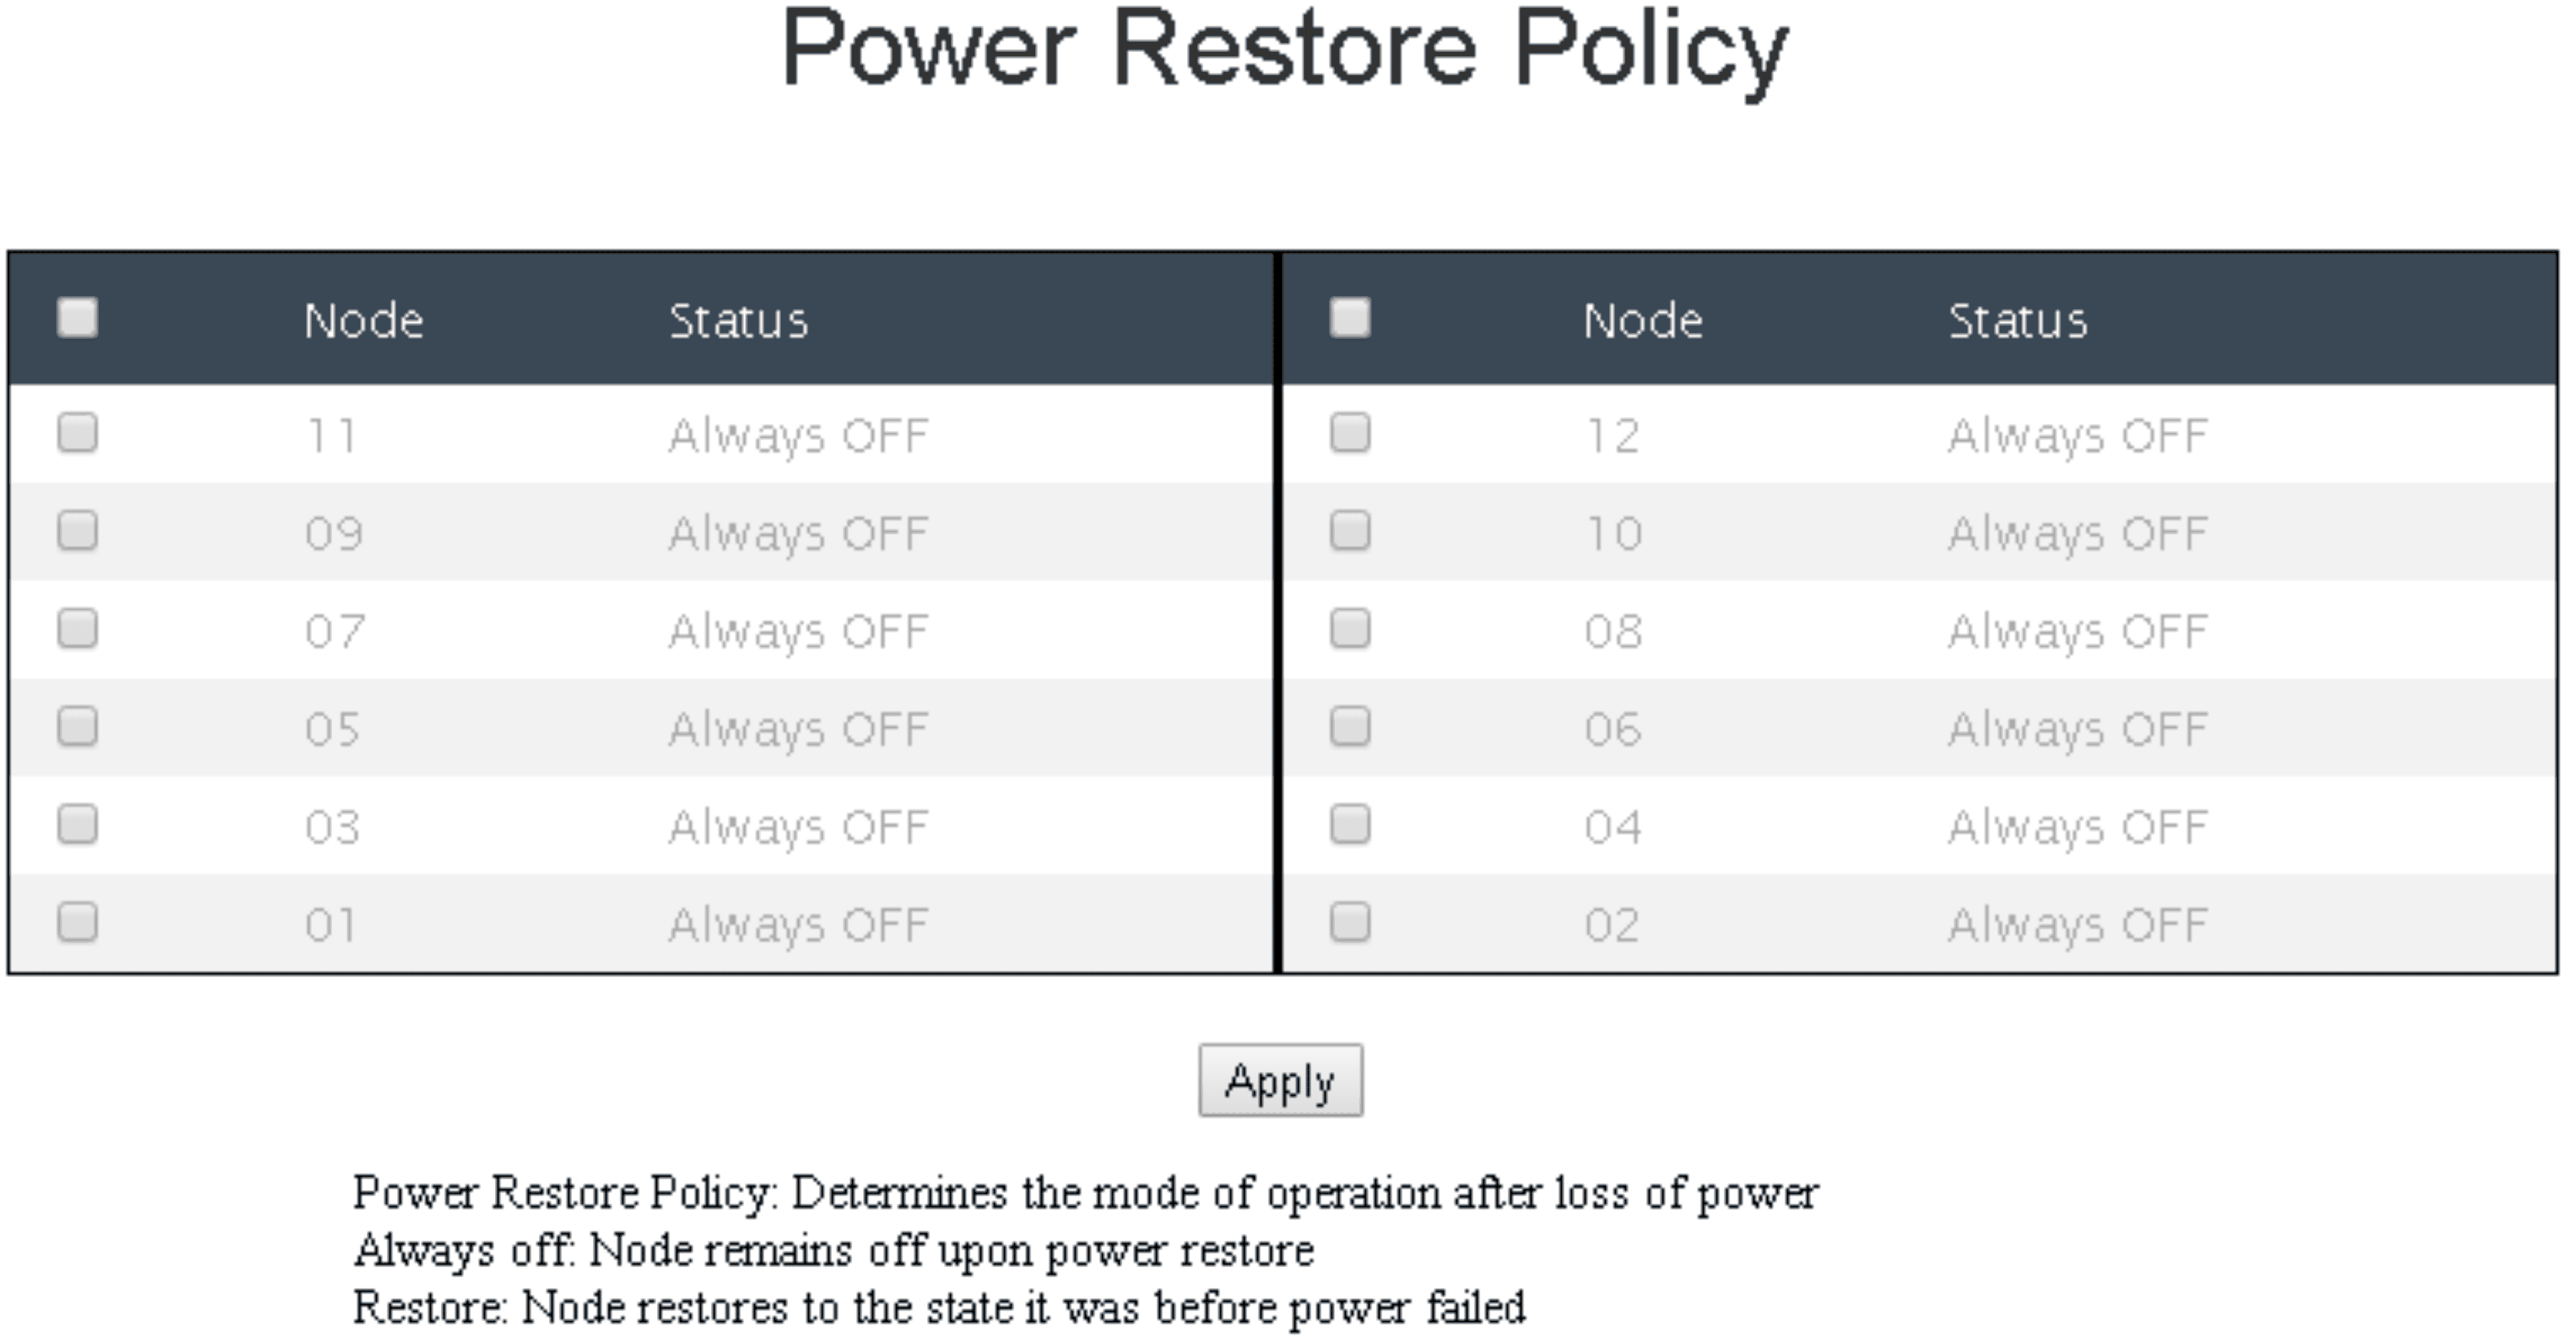 Power Restore Policy